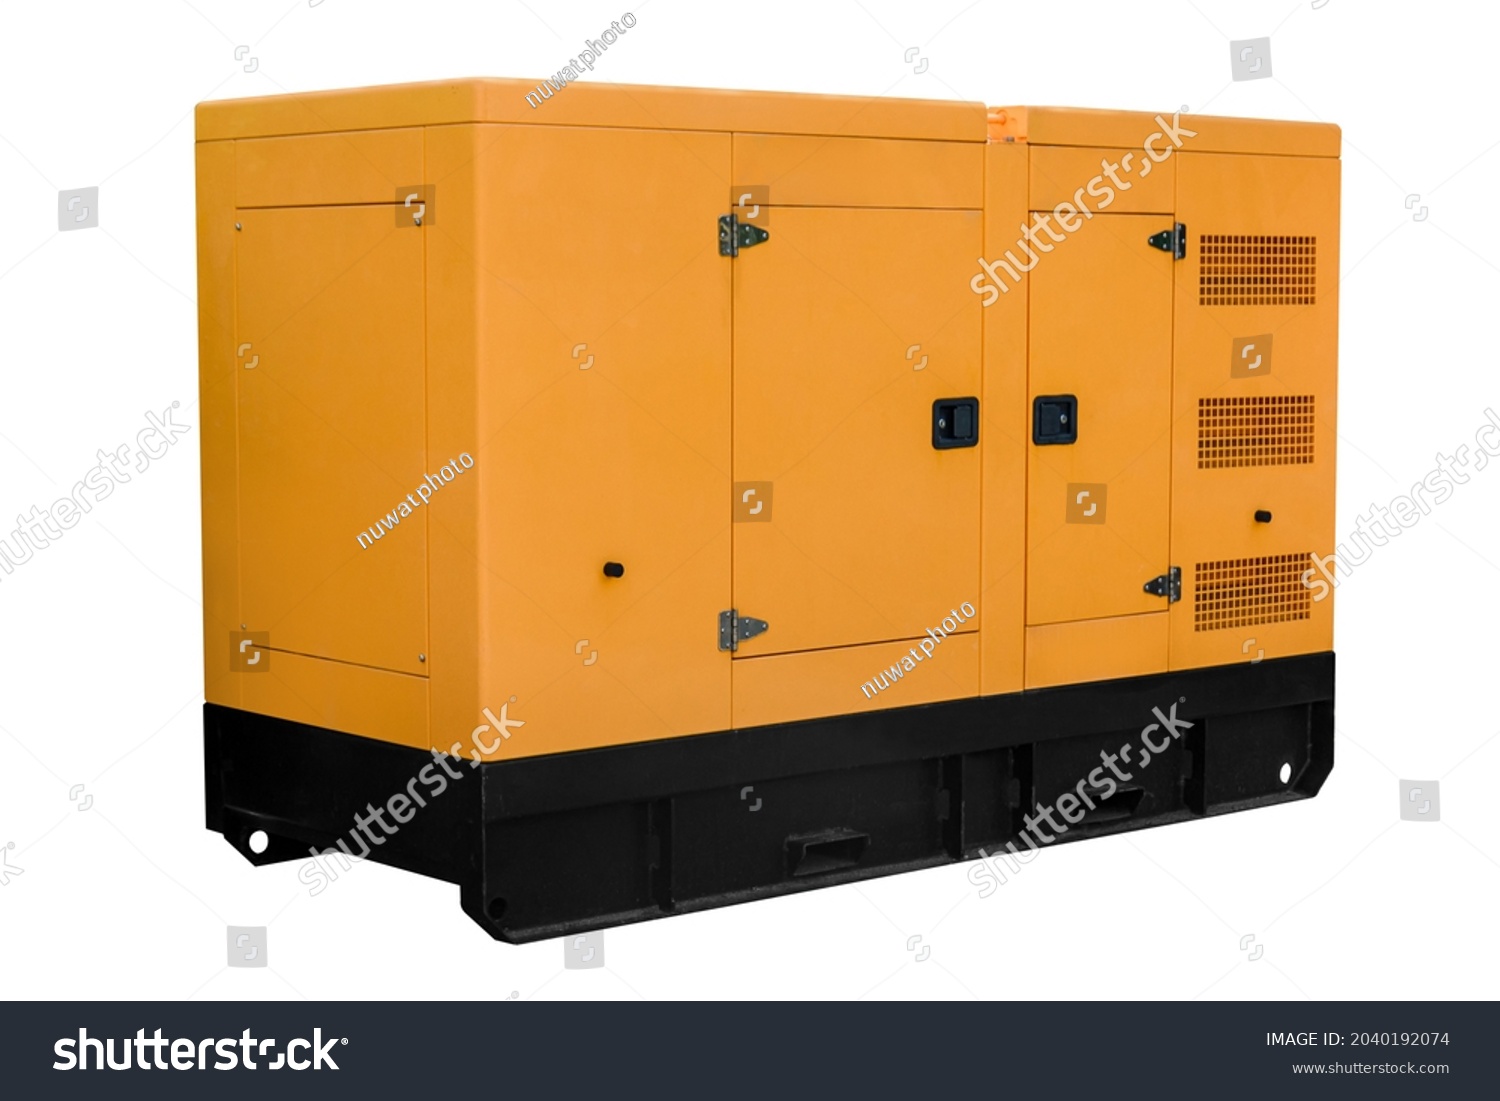 The mobile industrial diesel power generator on a white background works with a clipping path. #2040192074